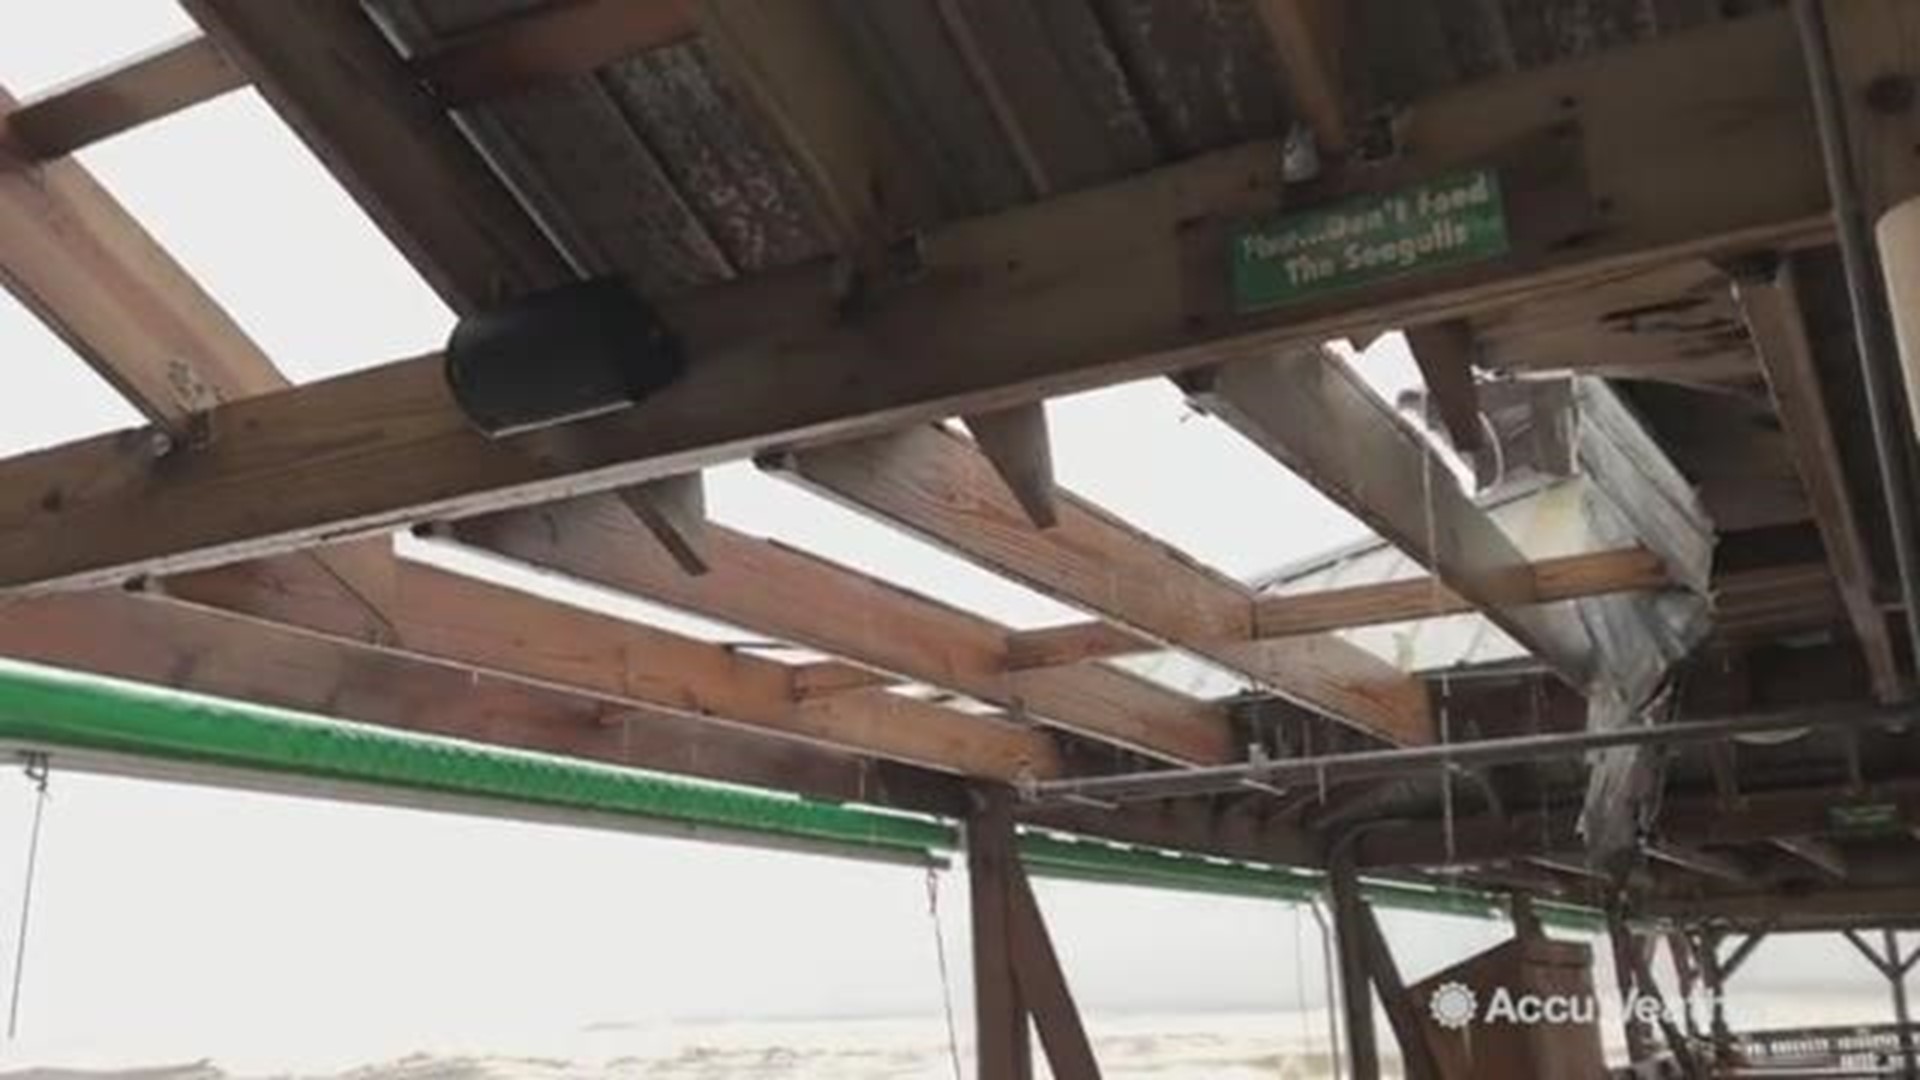 Winds of up to 150 mph are expected as Hurricane Michael nears. This metal roof from a hotel in Panama City Beach, Florida was completed ripped off from the strong winds. 